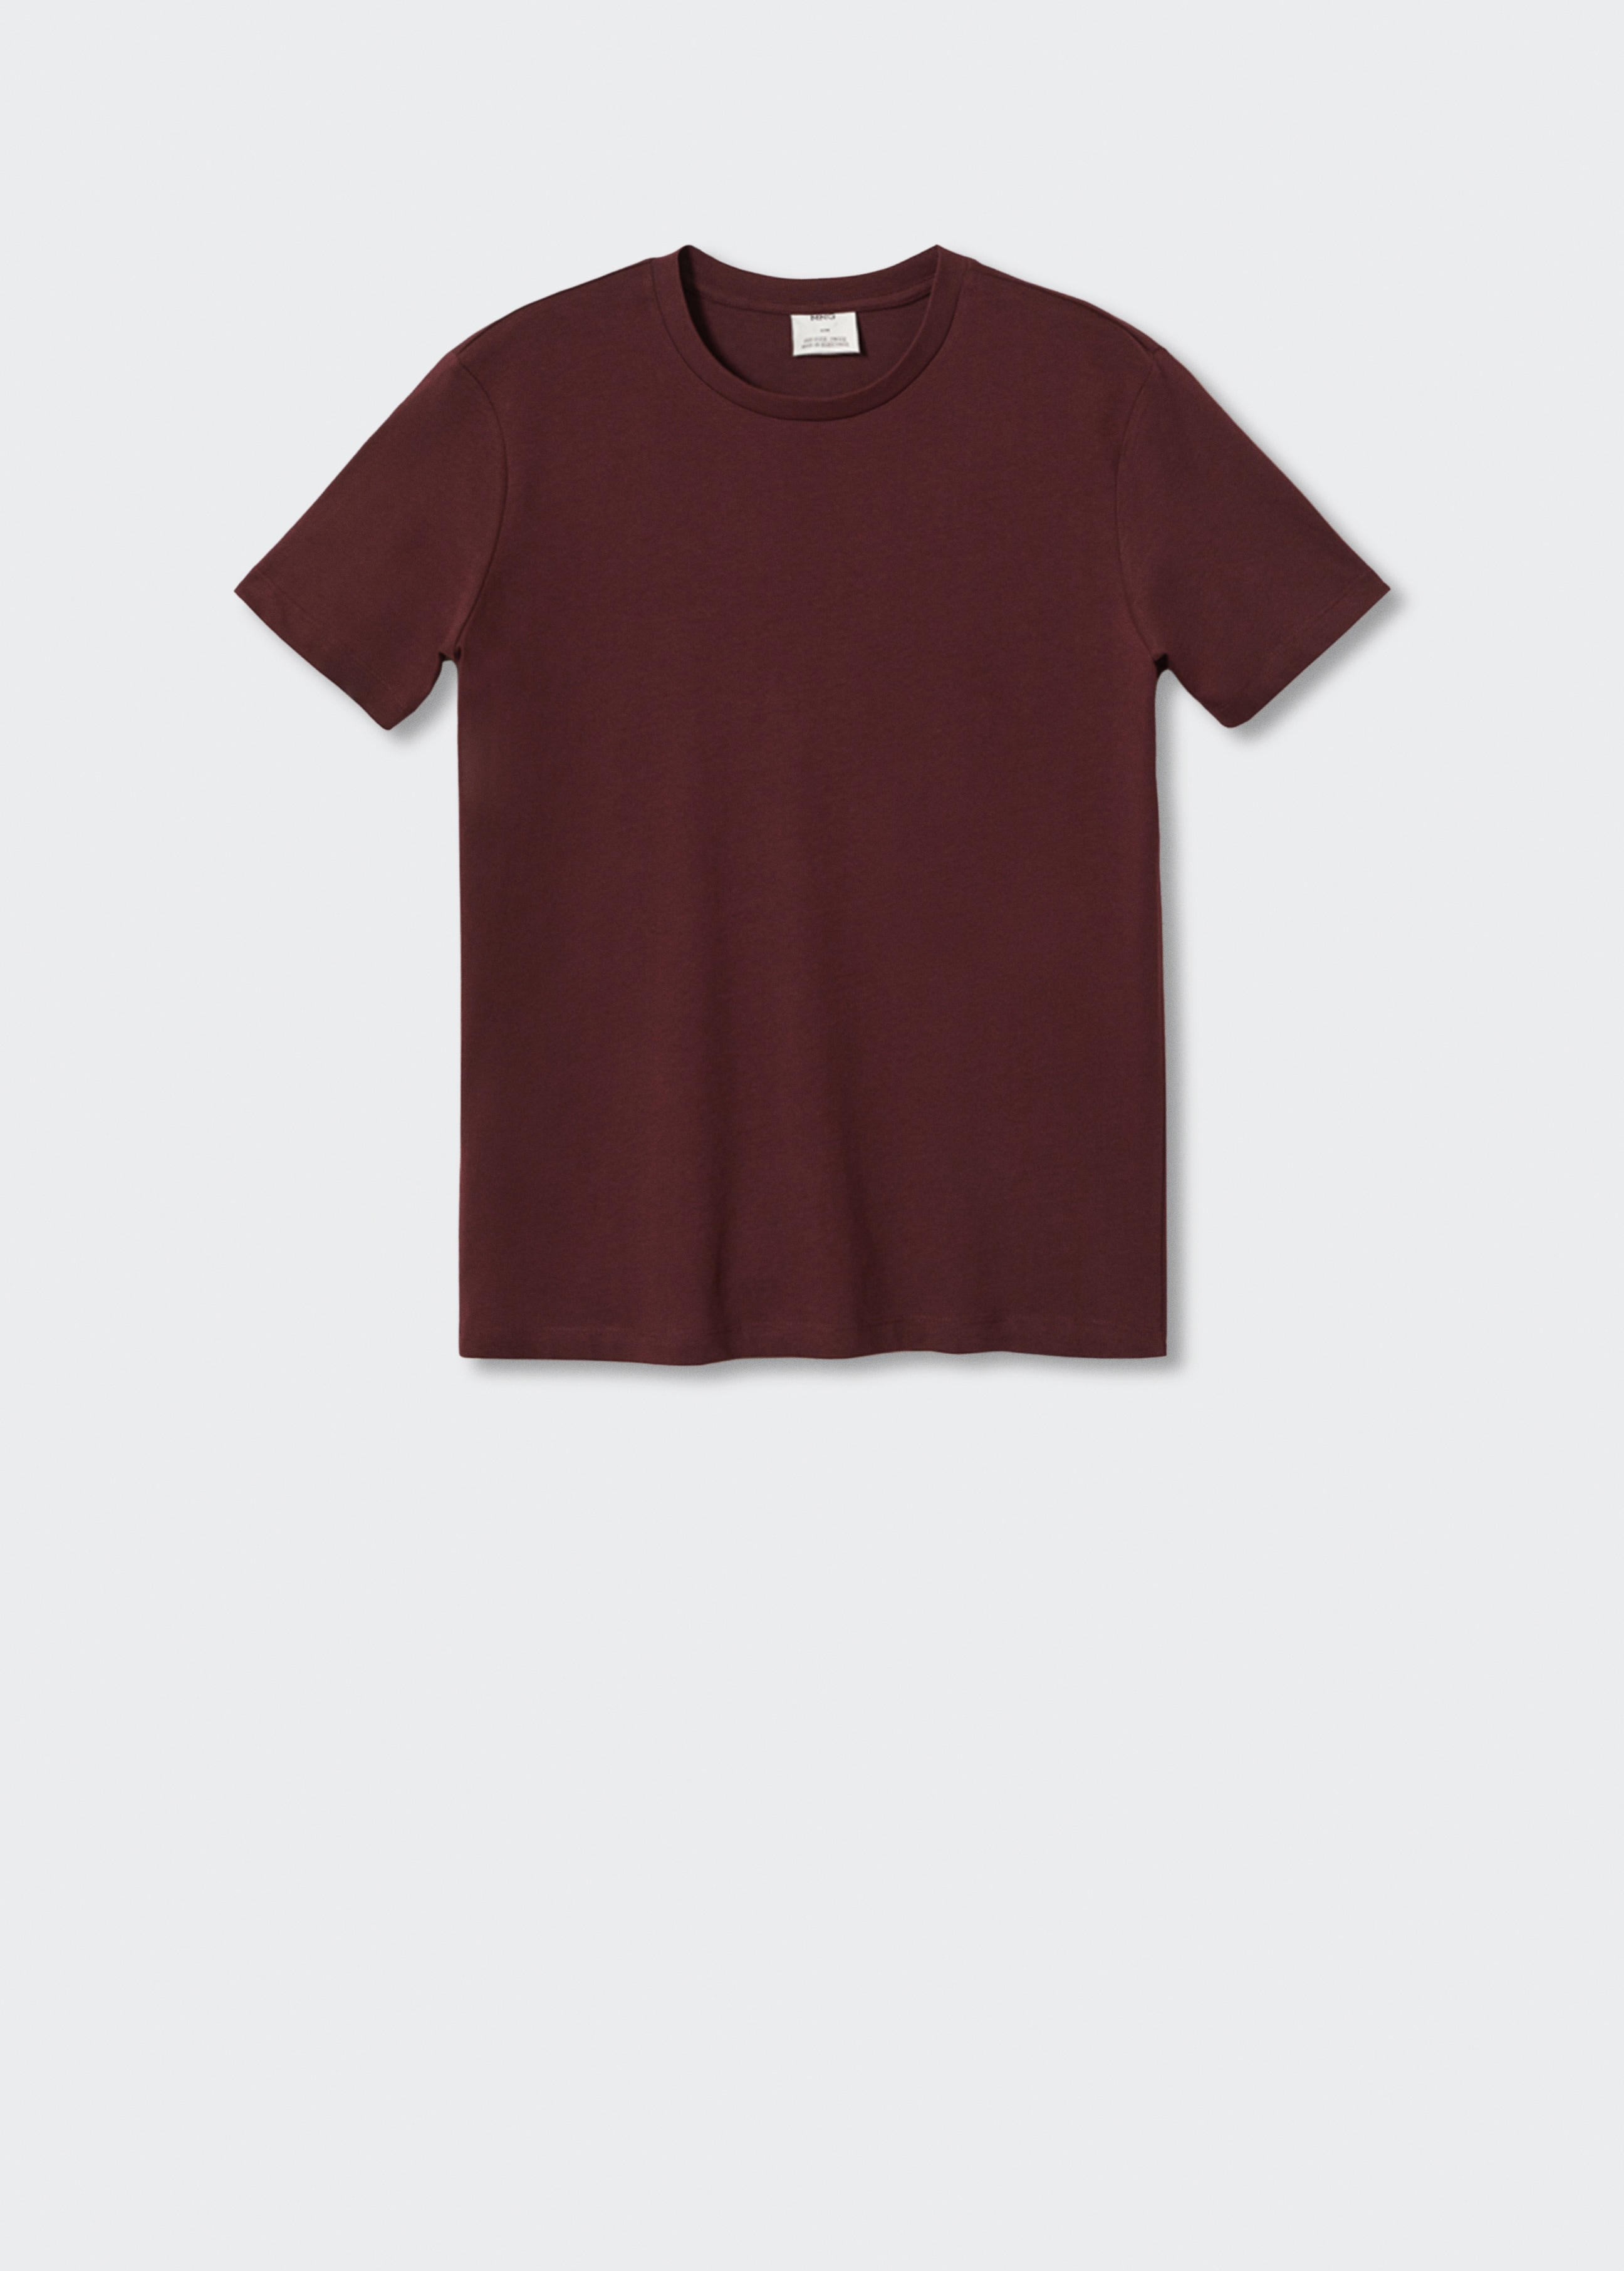 Basic lightweight cotton t-shirt - Article without model